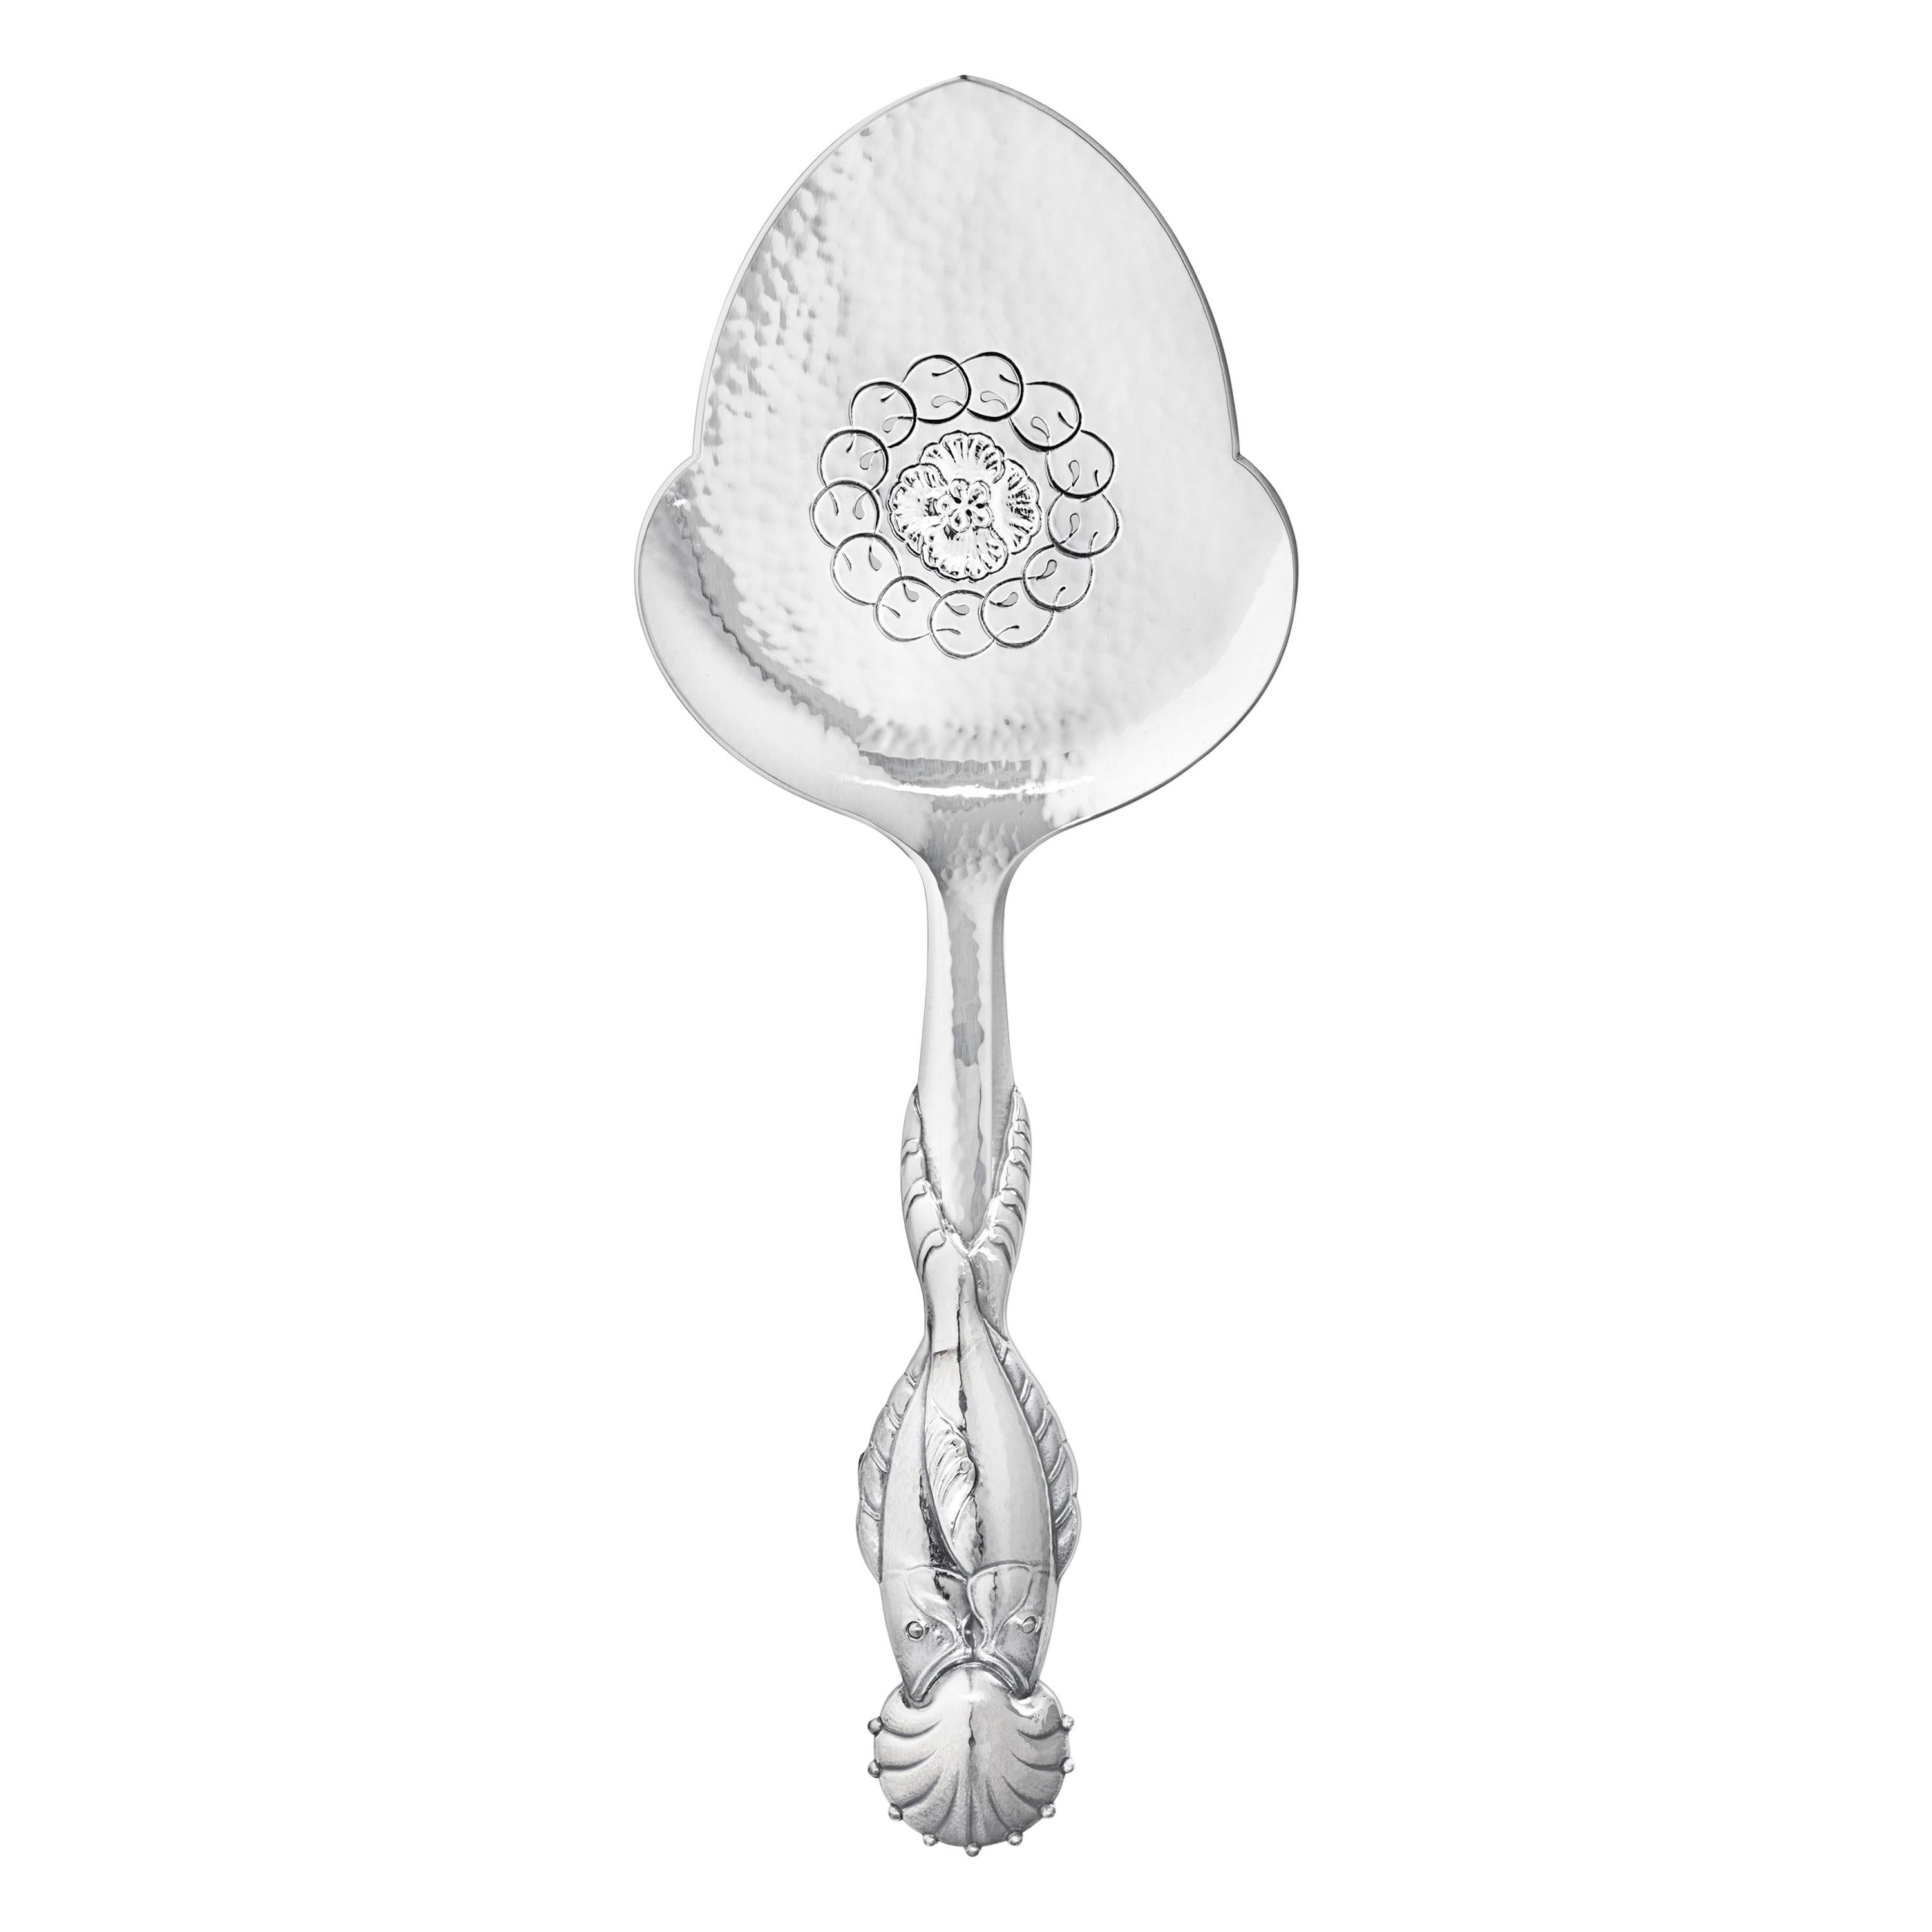 Georg Jensen No. 55 Sterling Silver Fish Serving Spoon with Fish Motif